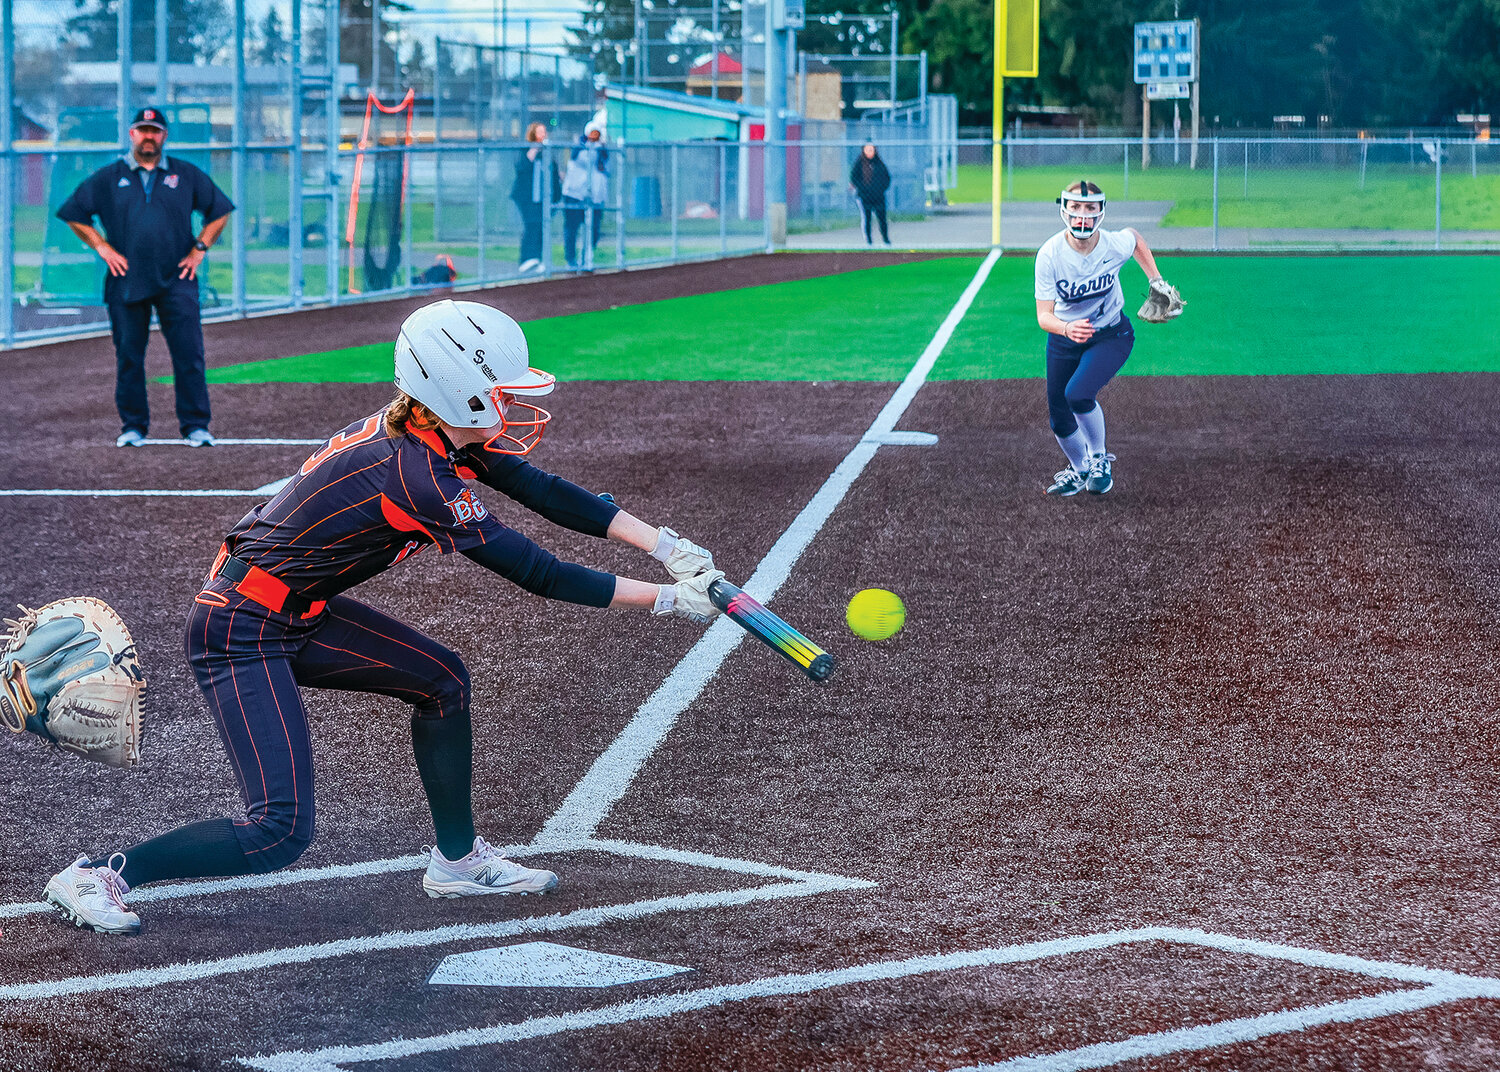 Candice Torgerson attempts a bunt for the Tigers during a game against Skyview at Fort Vancouver High School on Wednesday, April 12.